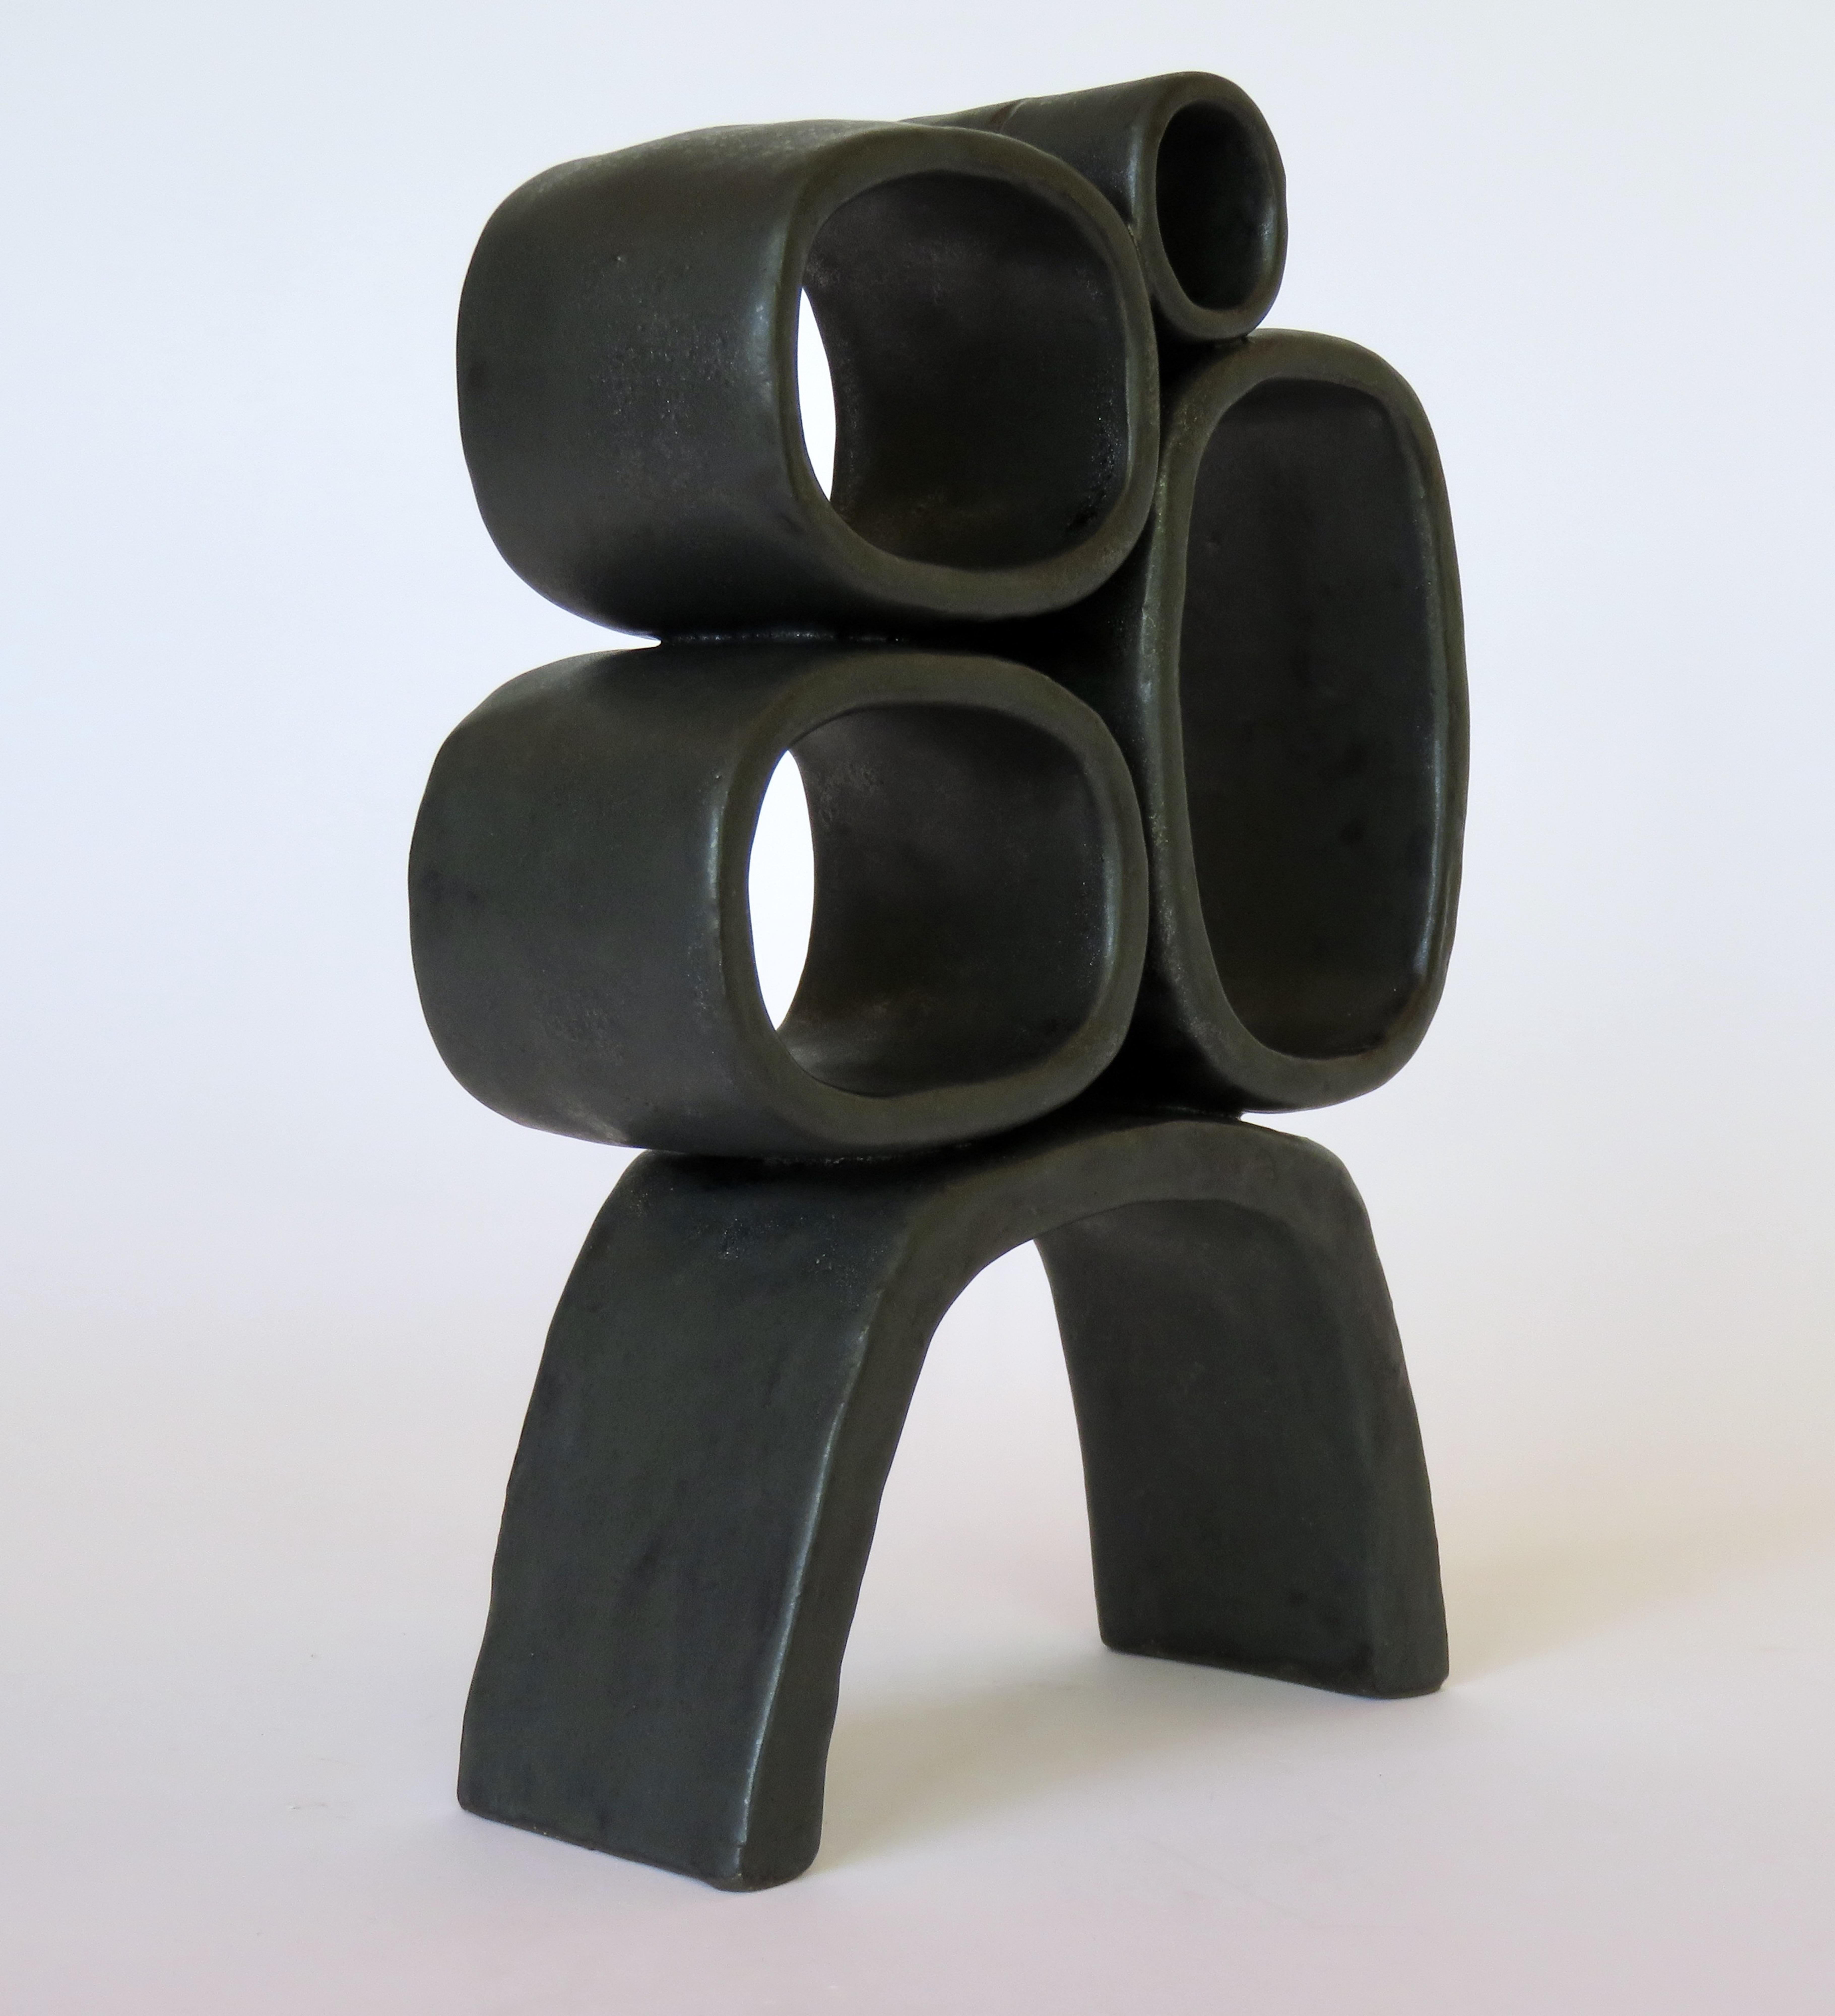 Glazed Metallic Black Hand-Built Ceramic Sculpture with Hollow Rings on Angled Legs